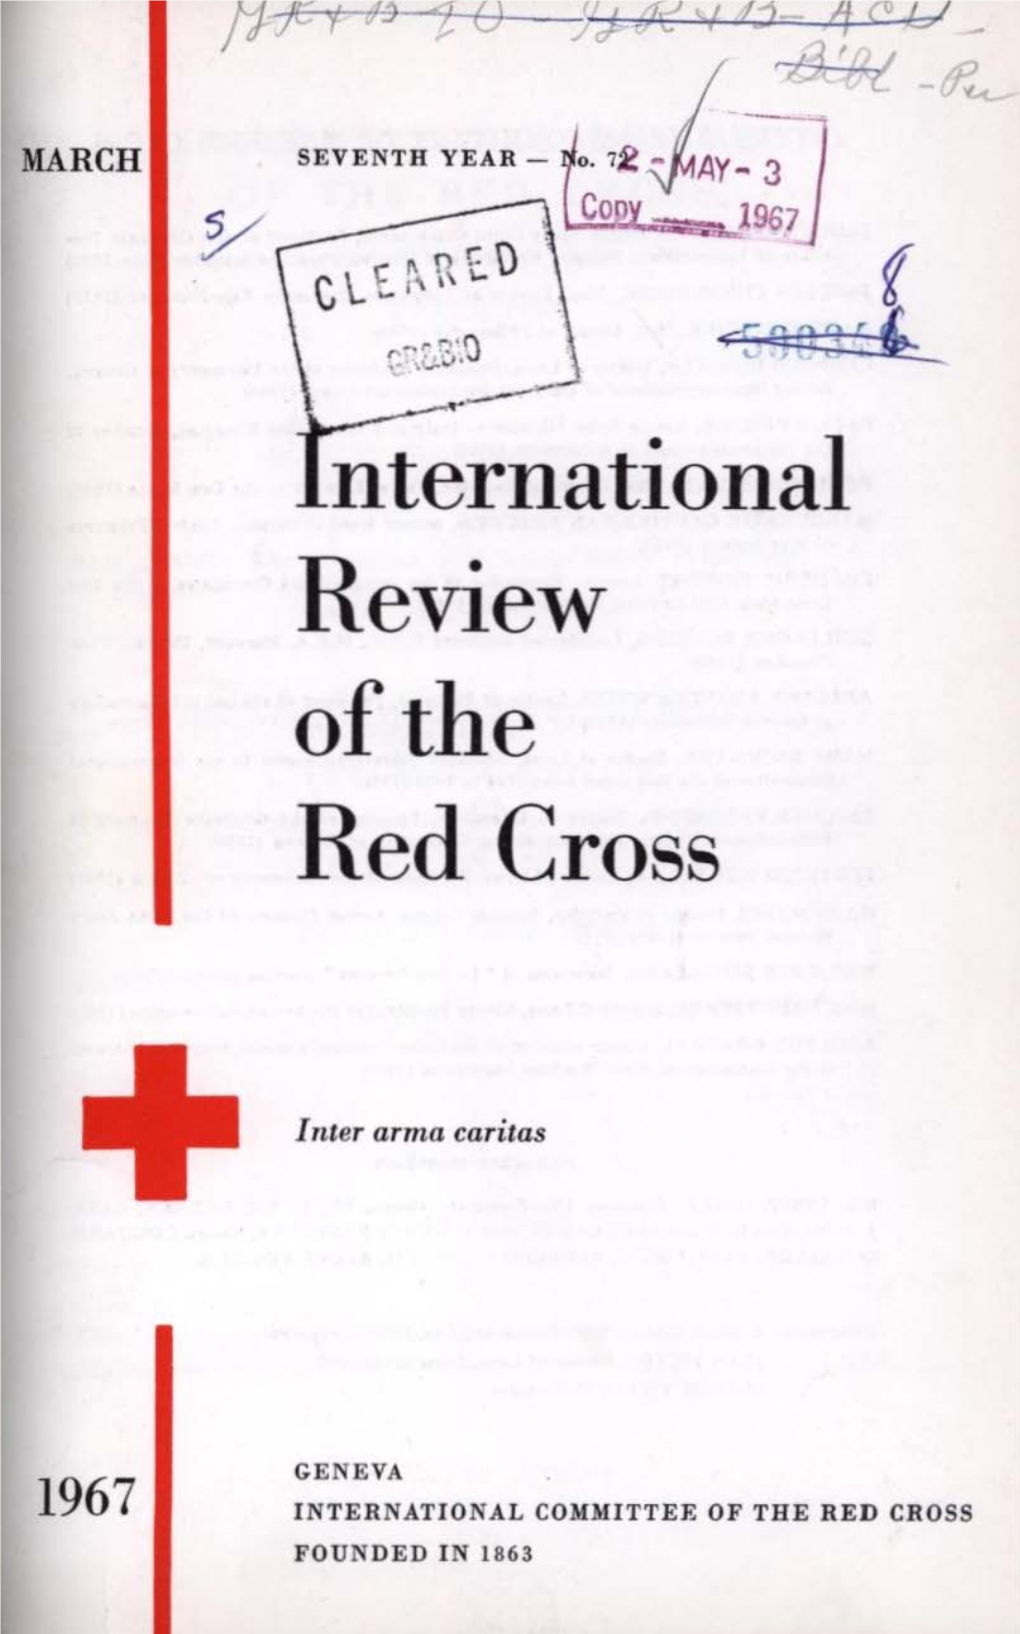 International Review of the Red Cross, March 1967, Seventh Year